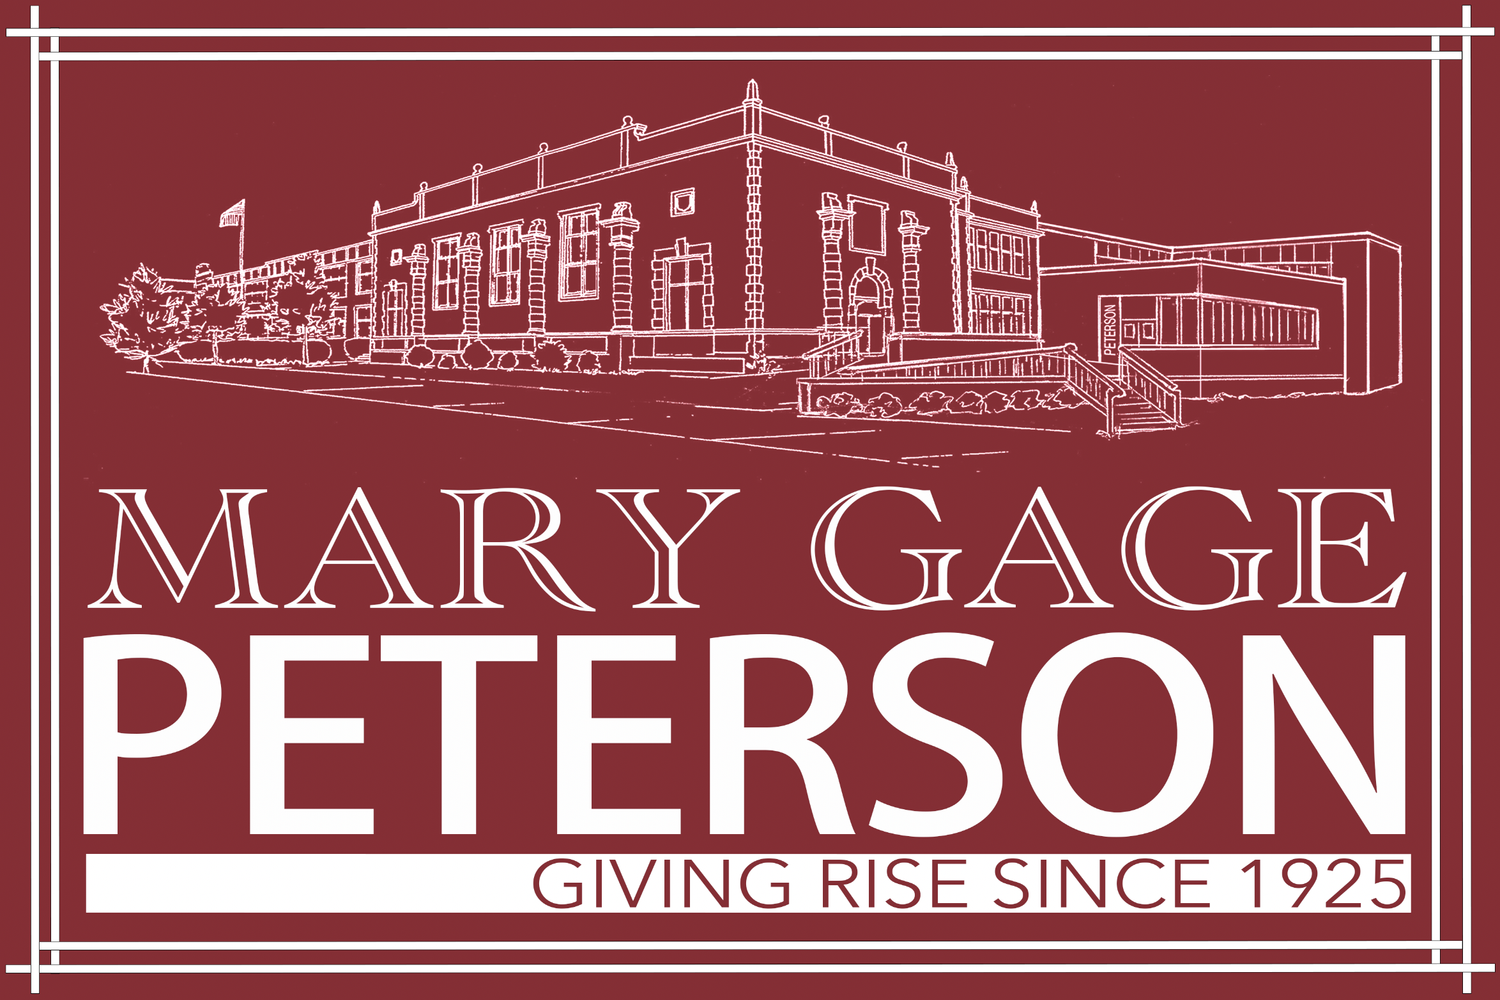 Mary Gage Peterson Elementary